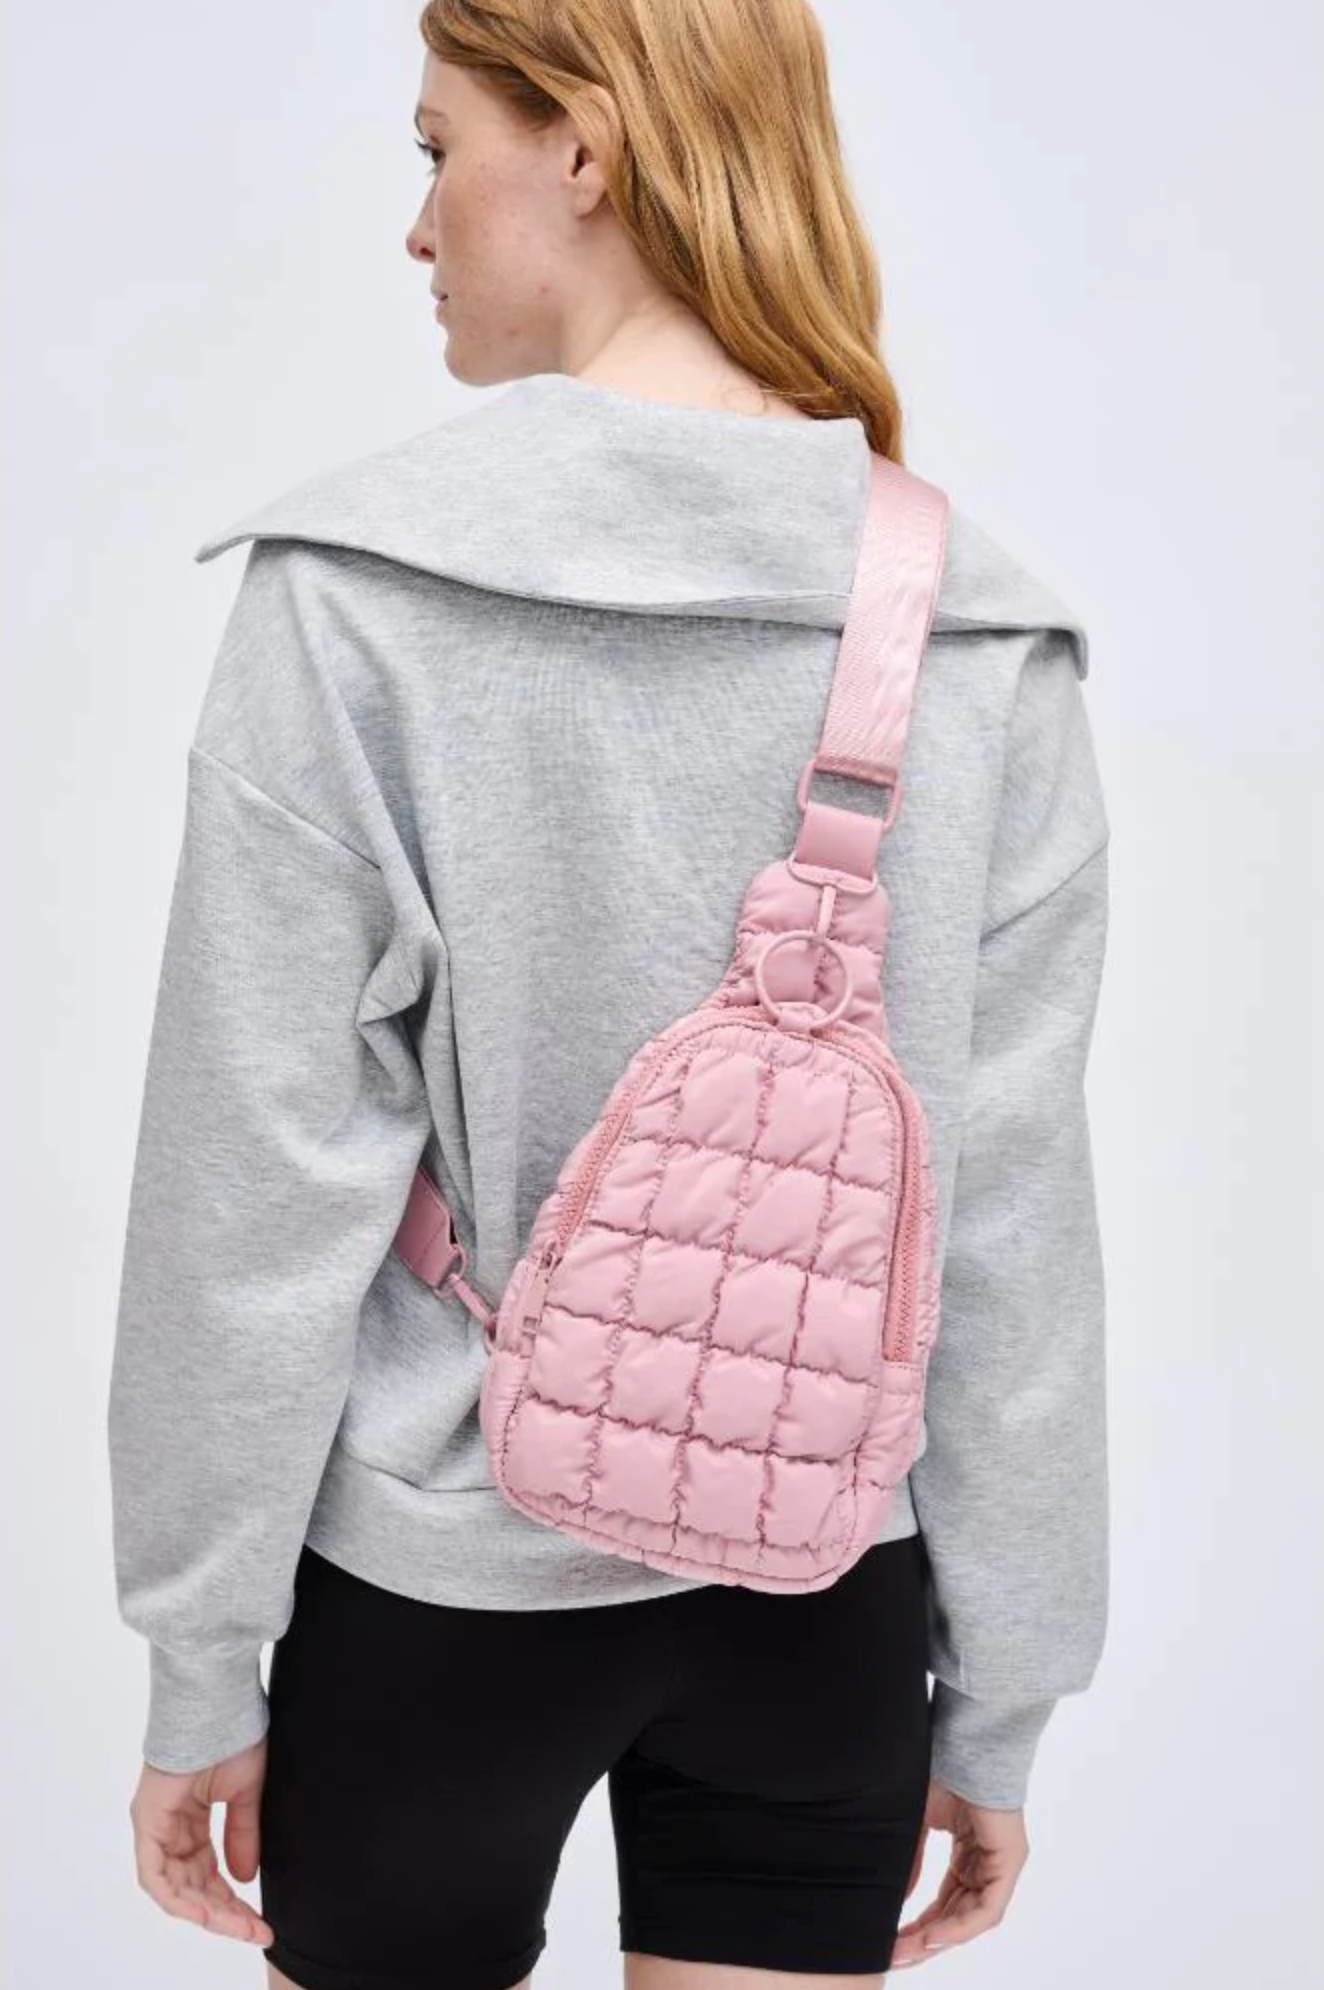 Puffy Perfection Sling Bag, Rose